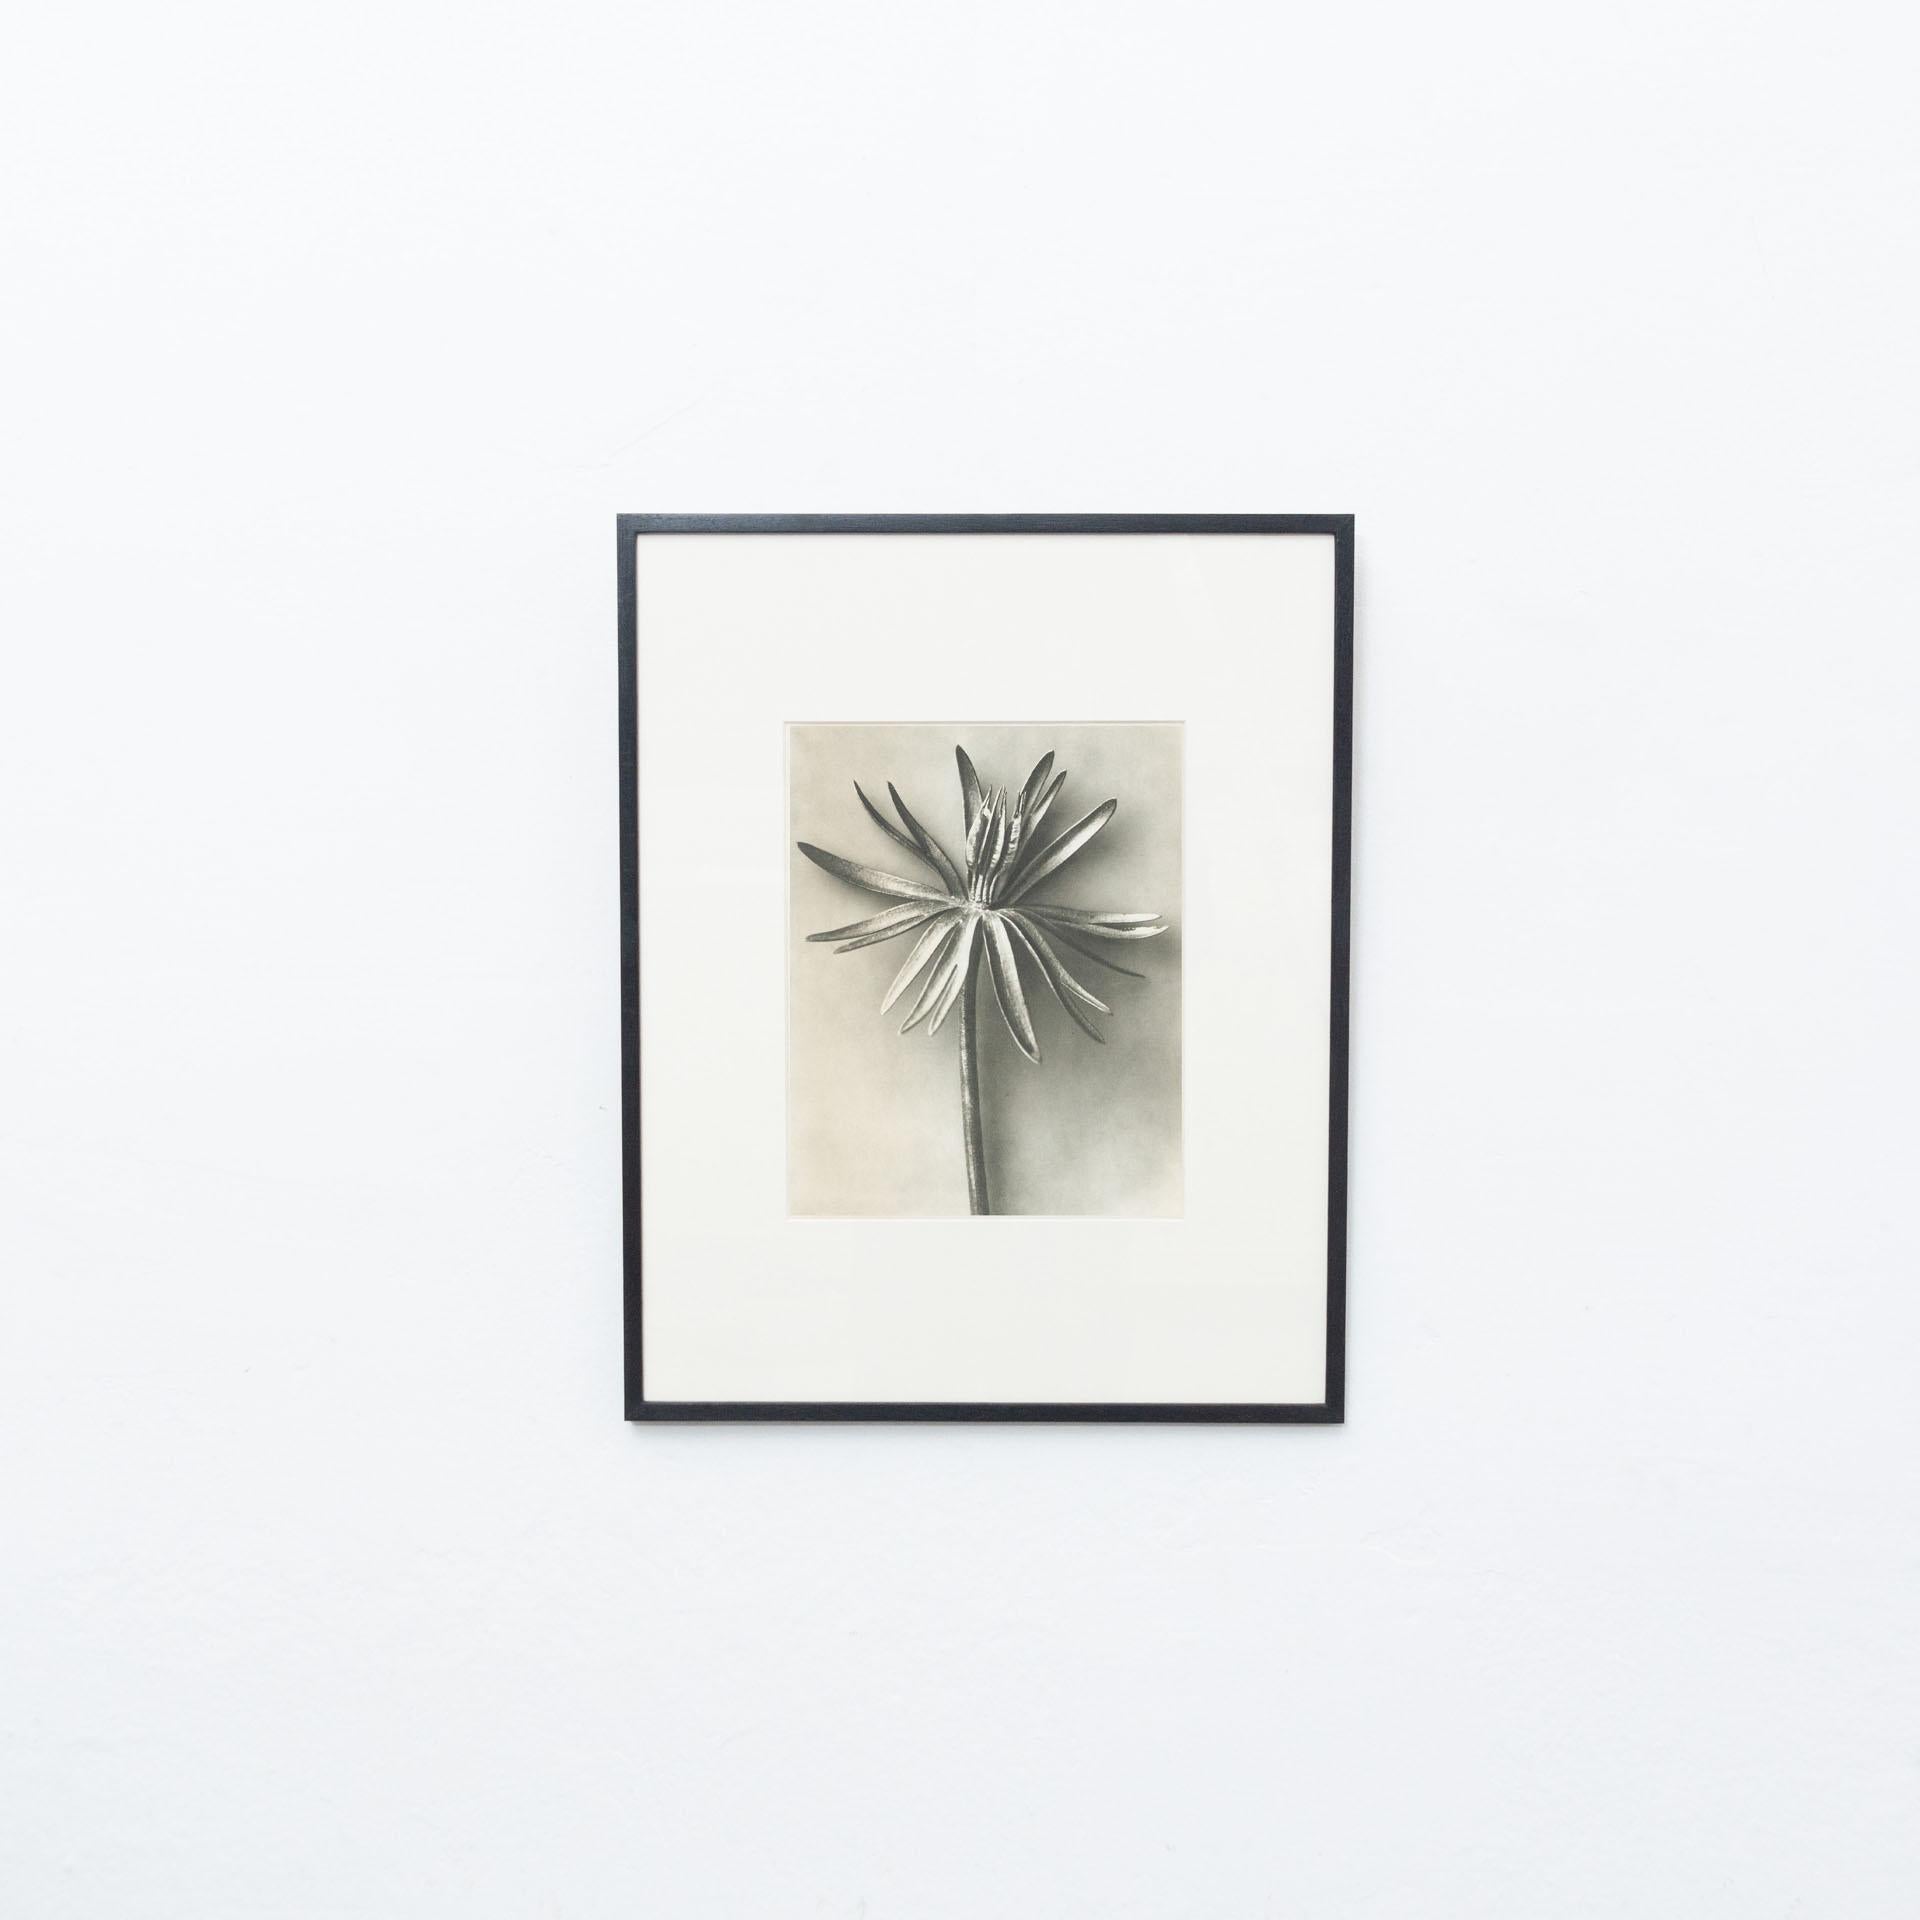 Karl Blossfeldt Photogravure from the edition of the book 'Wunder in der Natur' in 1942.

Photography number 95. 
In original condition, with minor wear consistent with age and use, preserving a beautiful patina.

Karl Blossfeldt (June 13, 1865